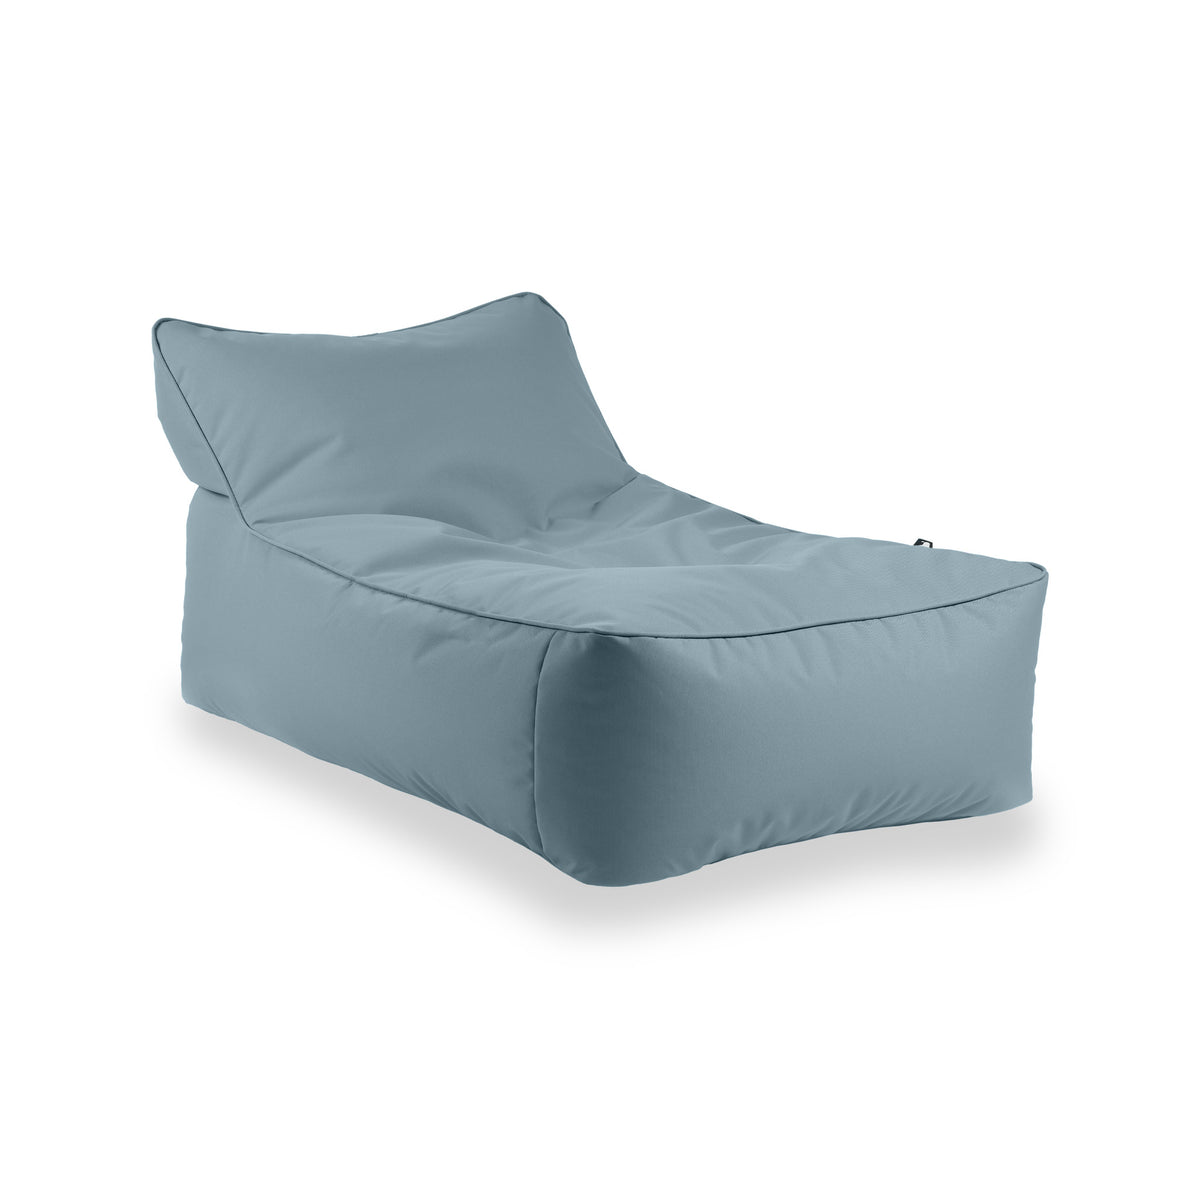 B Bean Bed in Sea Blue from Roseland Furniture